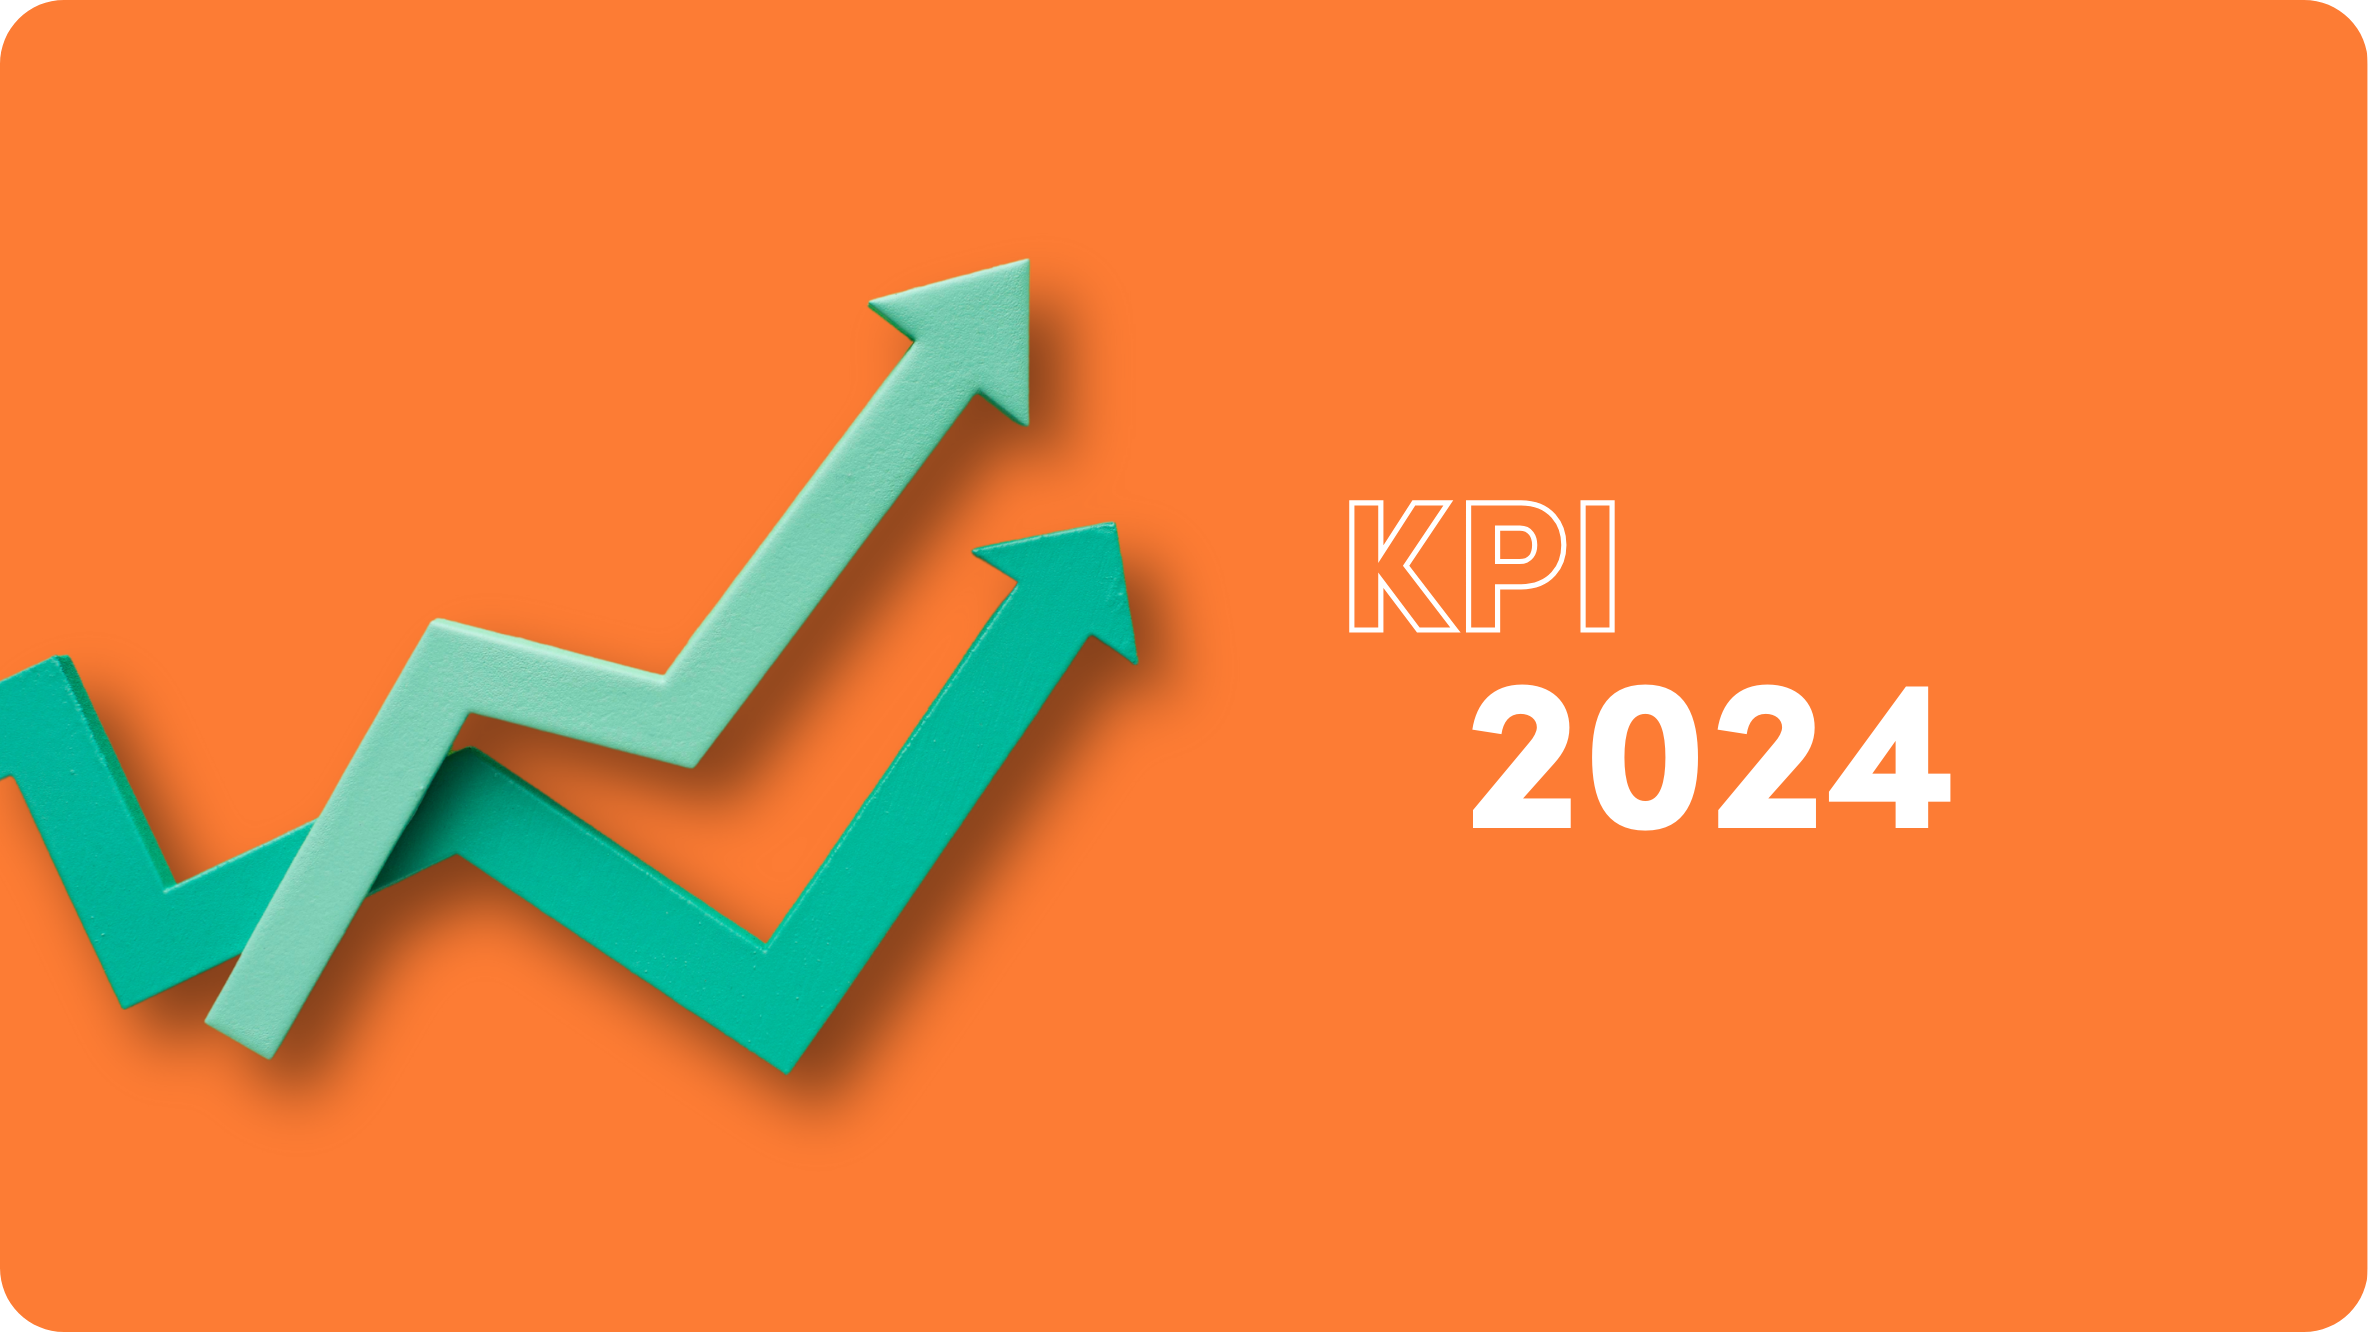 Top Advertising KPIs to Strive For in 2024